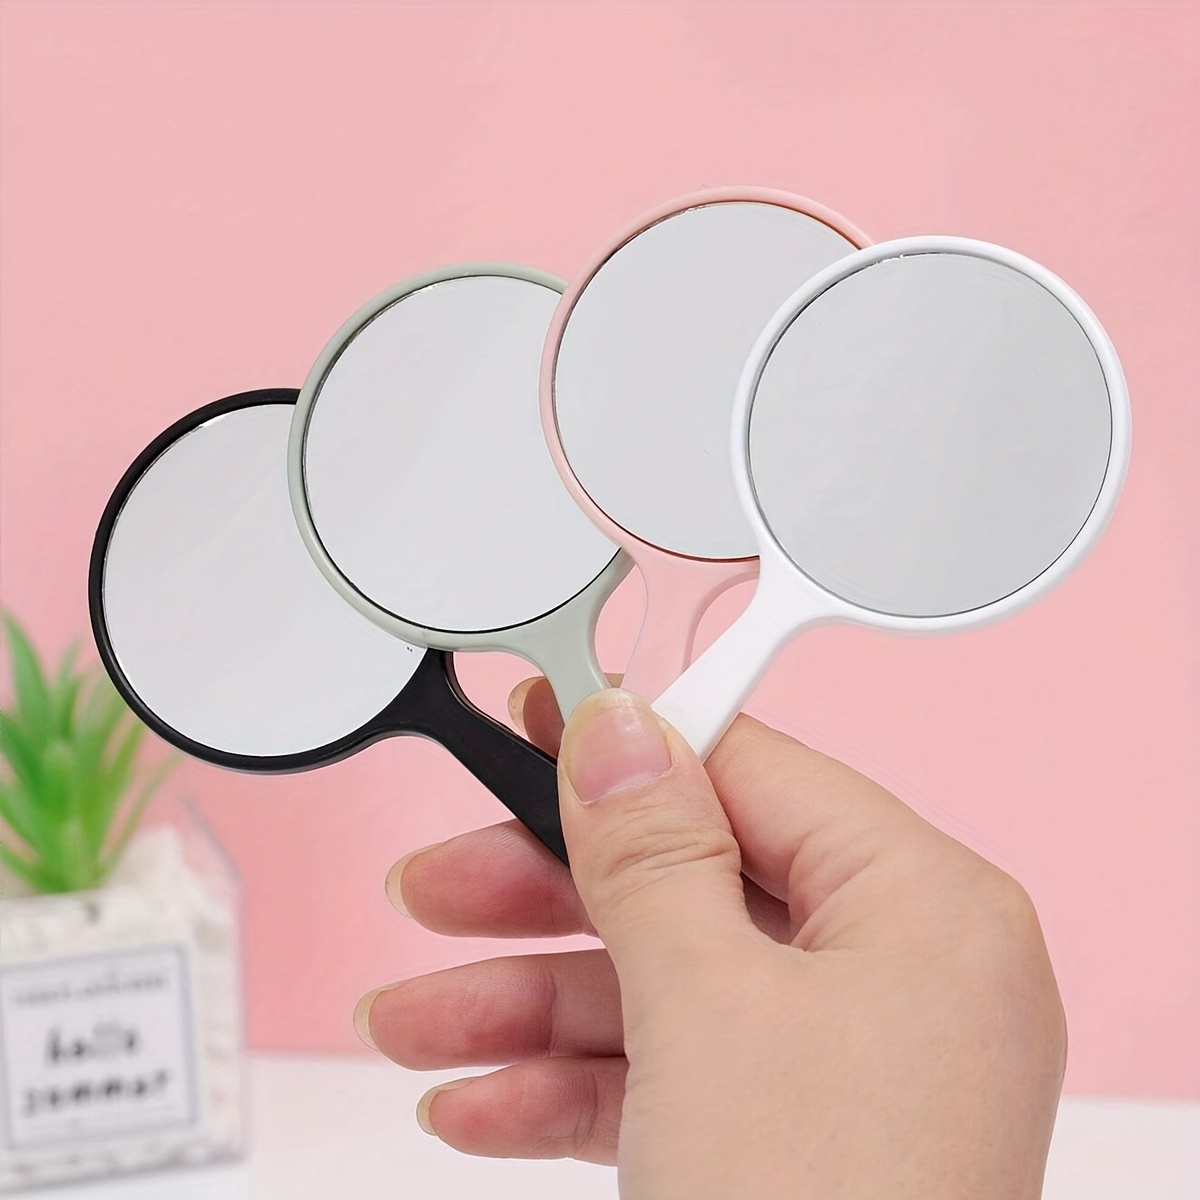 

4pcs Cute Handheld Mirror, Portable Pocket Mirror, Small Round With Handle Makeup Mirror, Lovely Mini Vanity Mirrors, Easy Carry Compact Mirrors For Daily Use